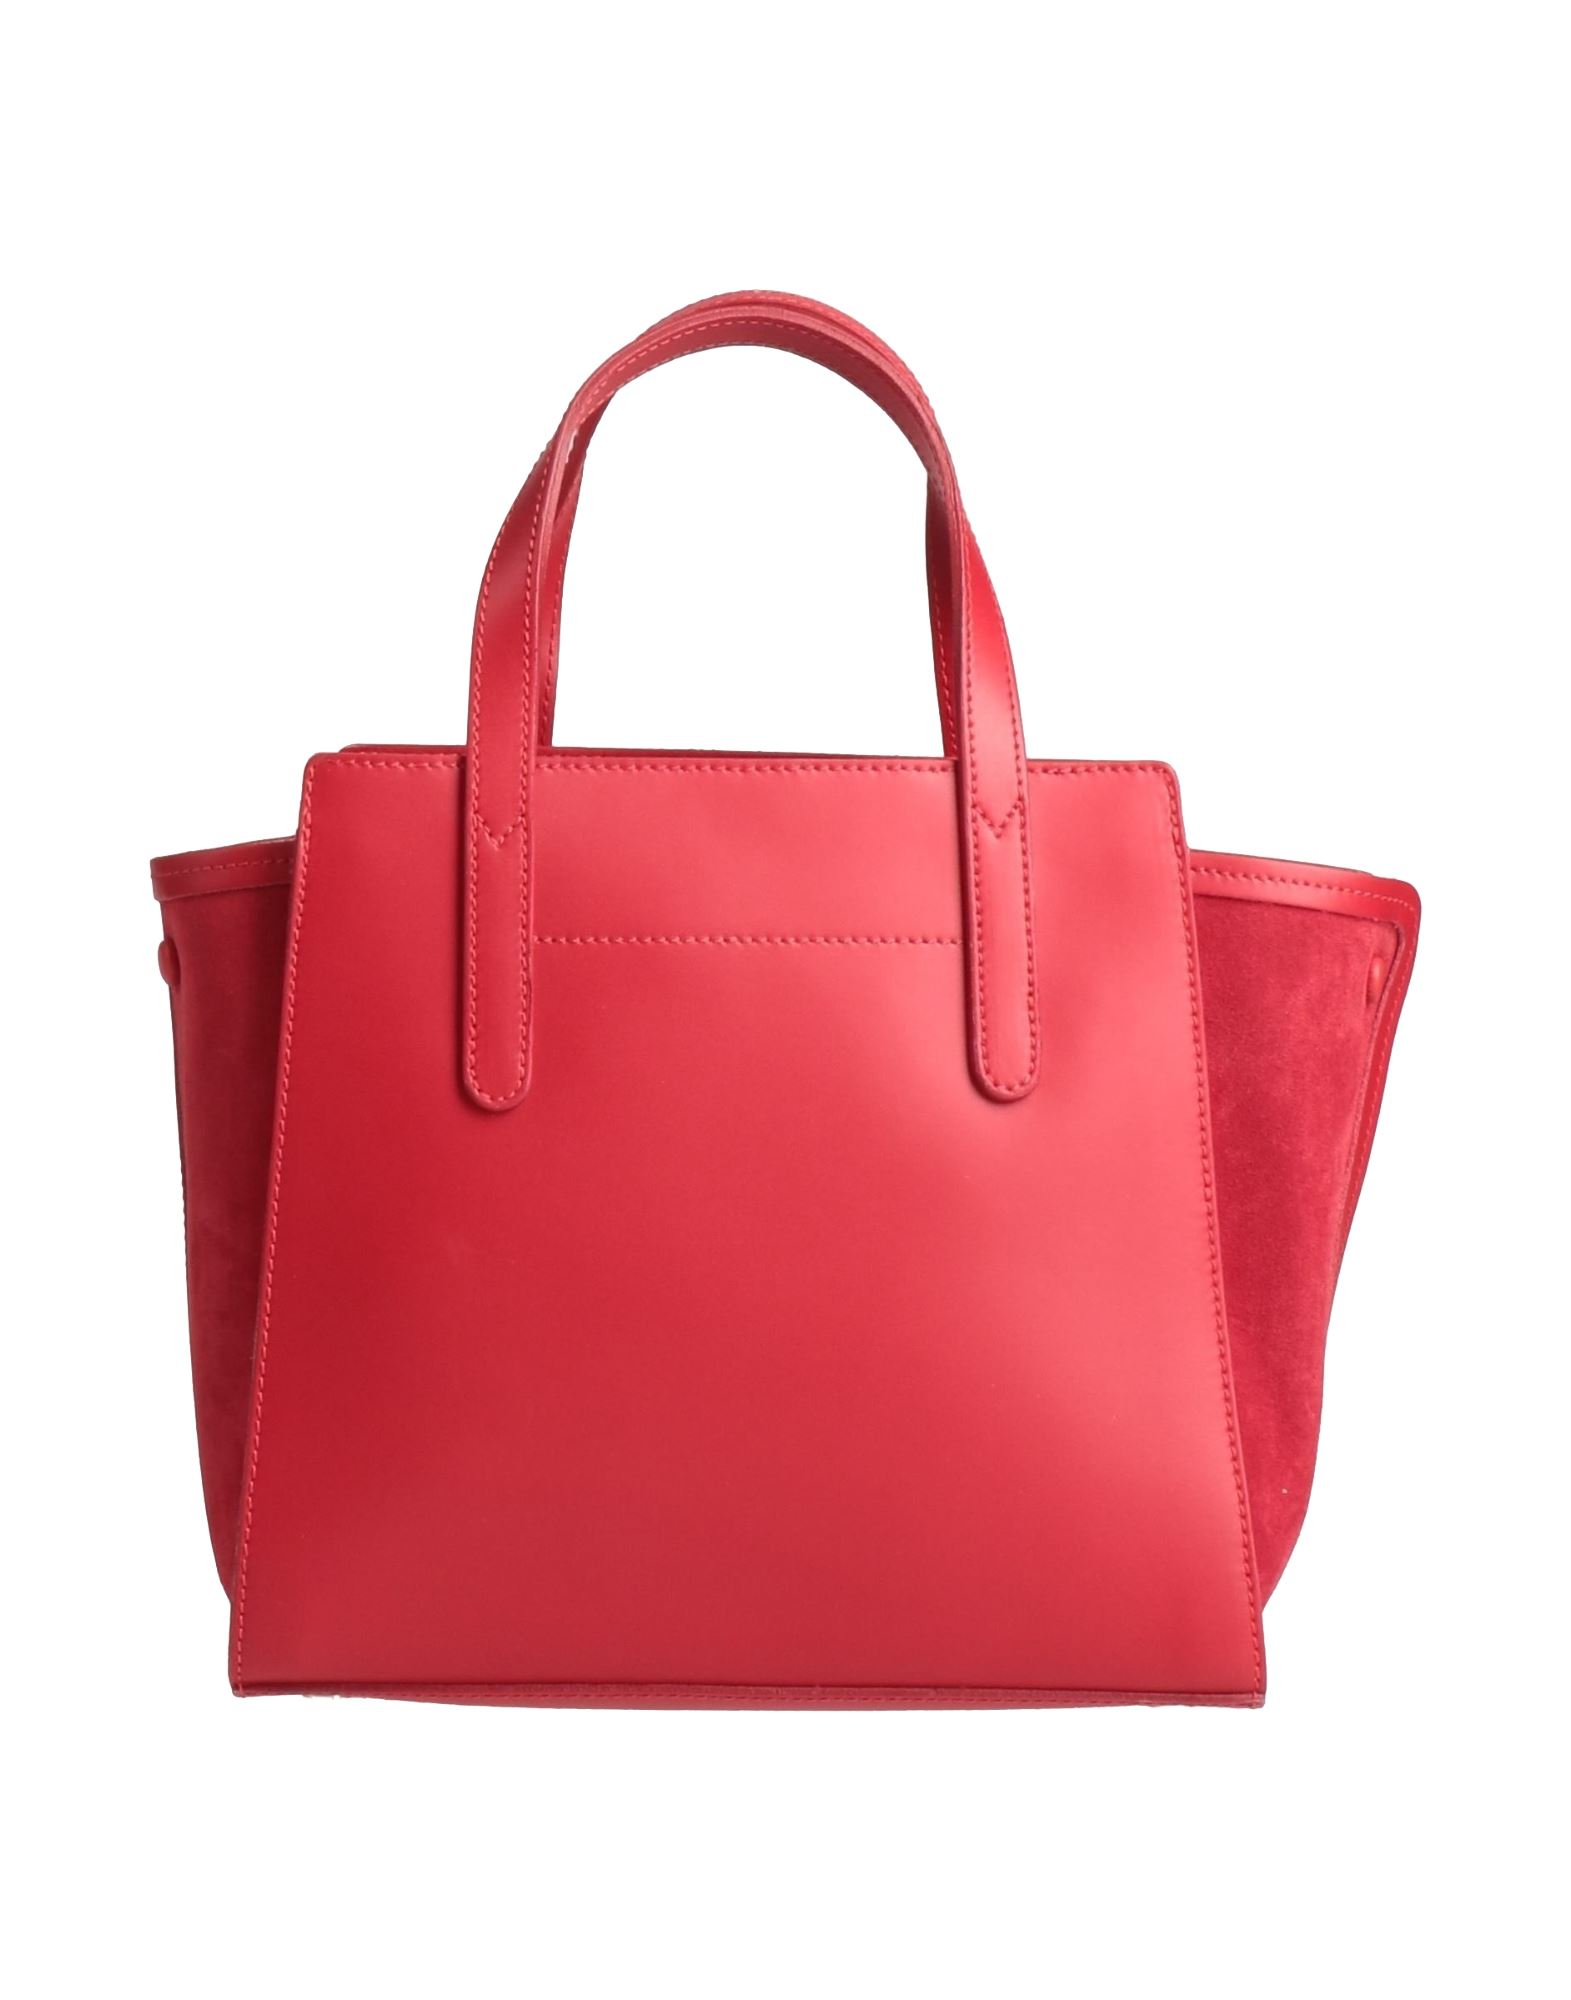 Innue' Woman Handbag Red Size - Soft Leather